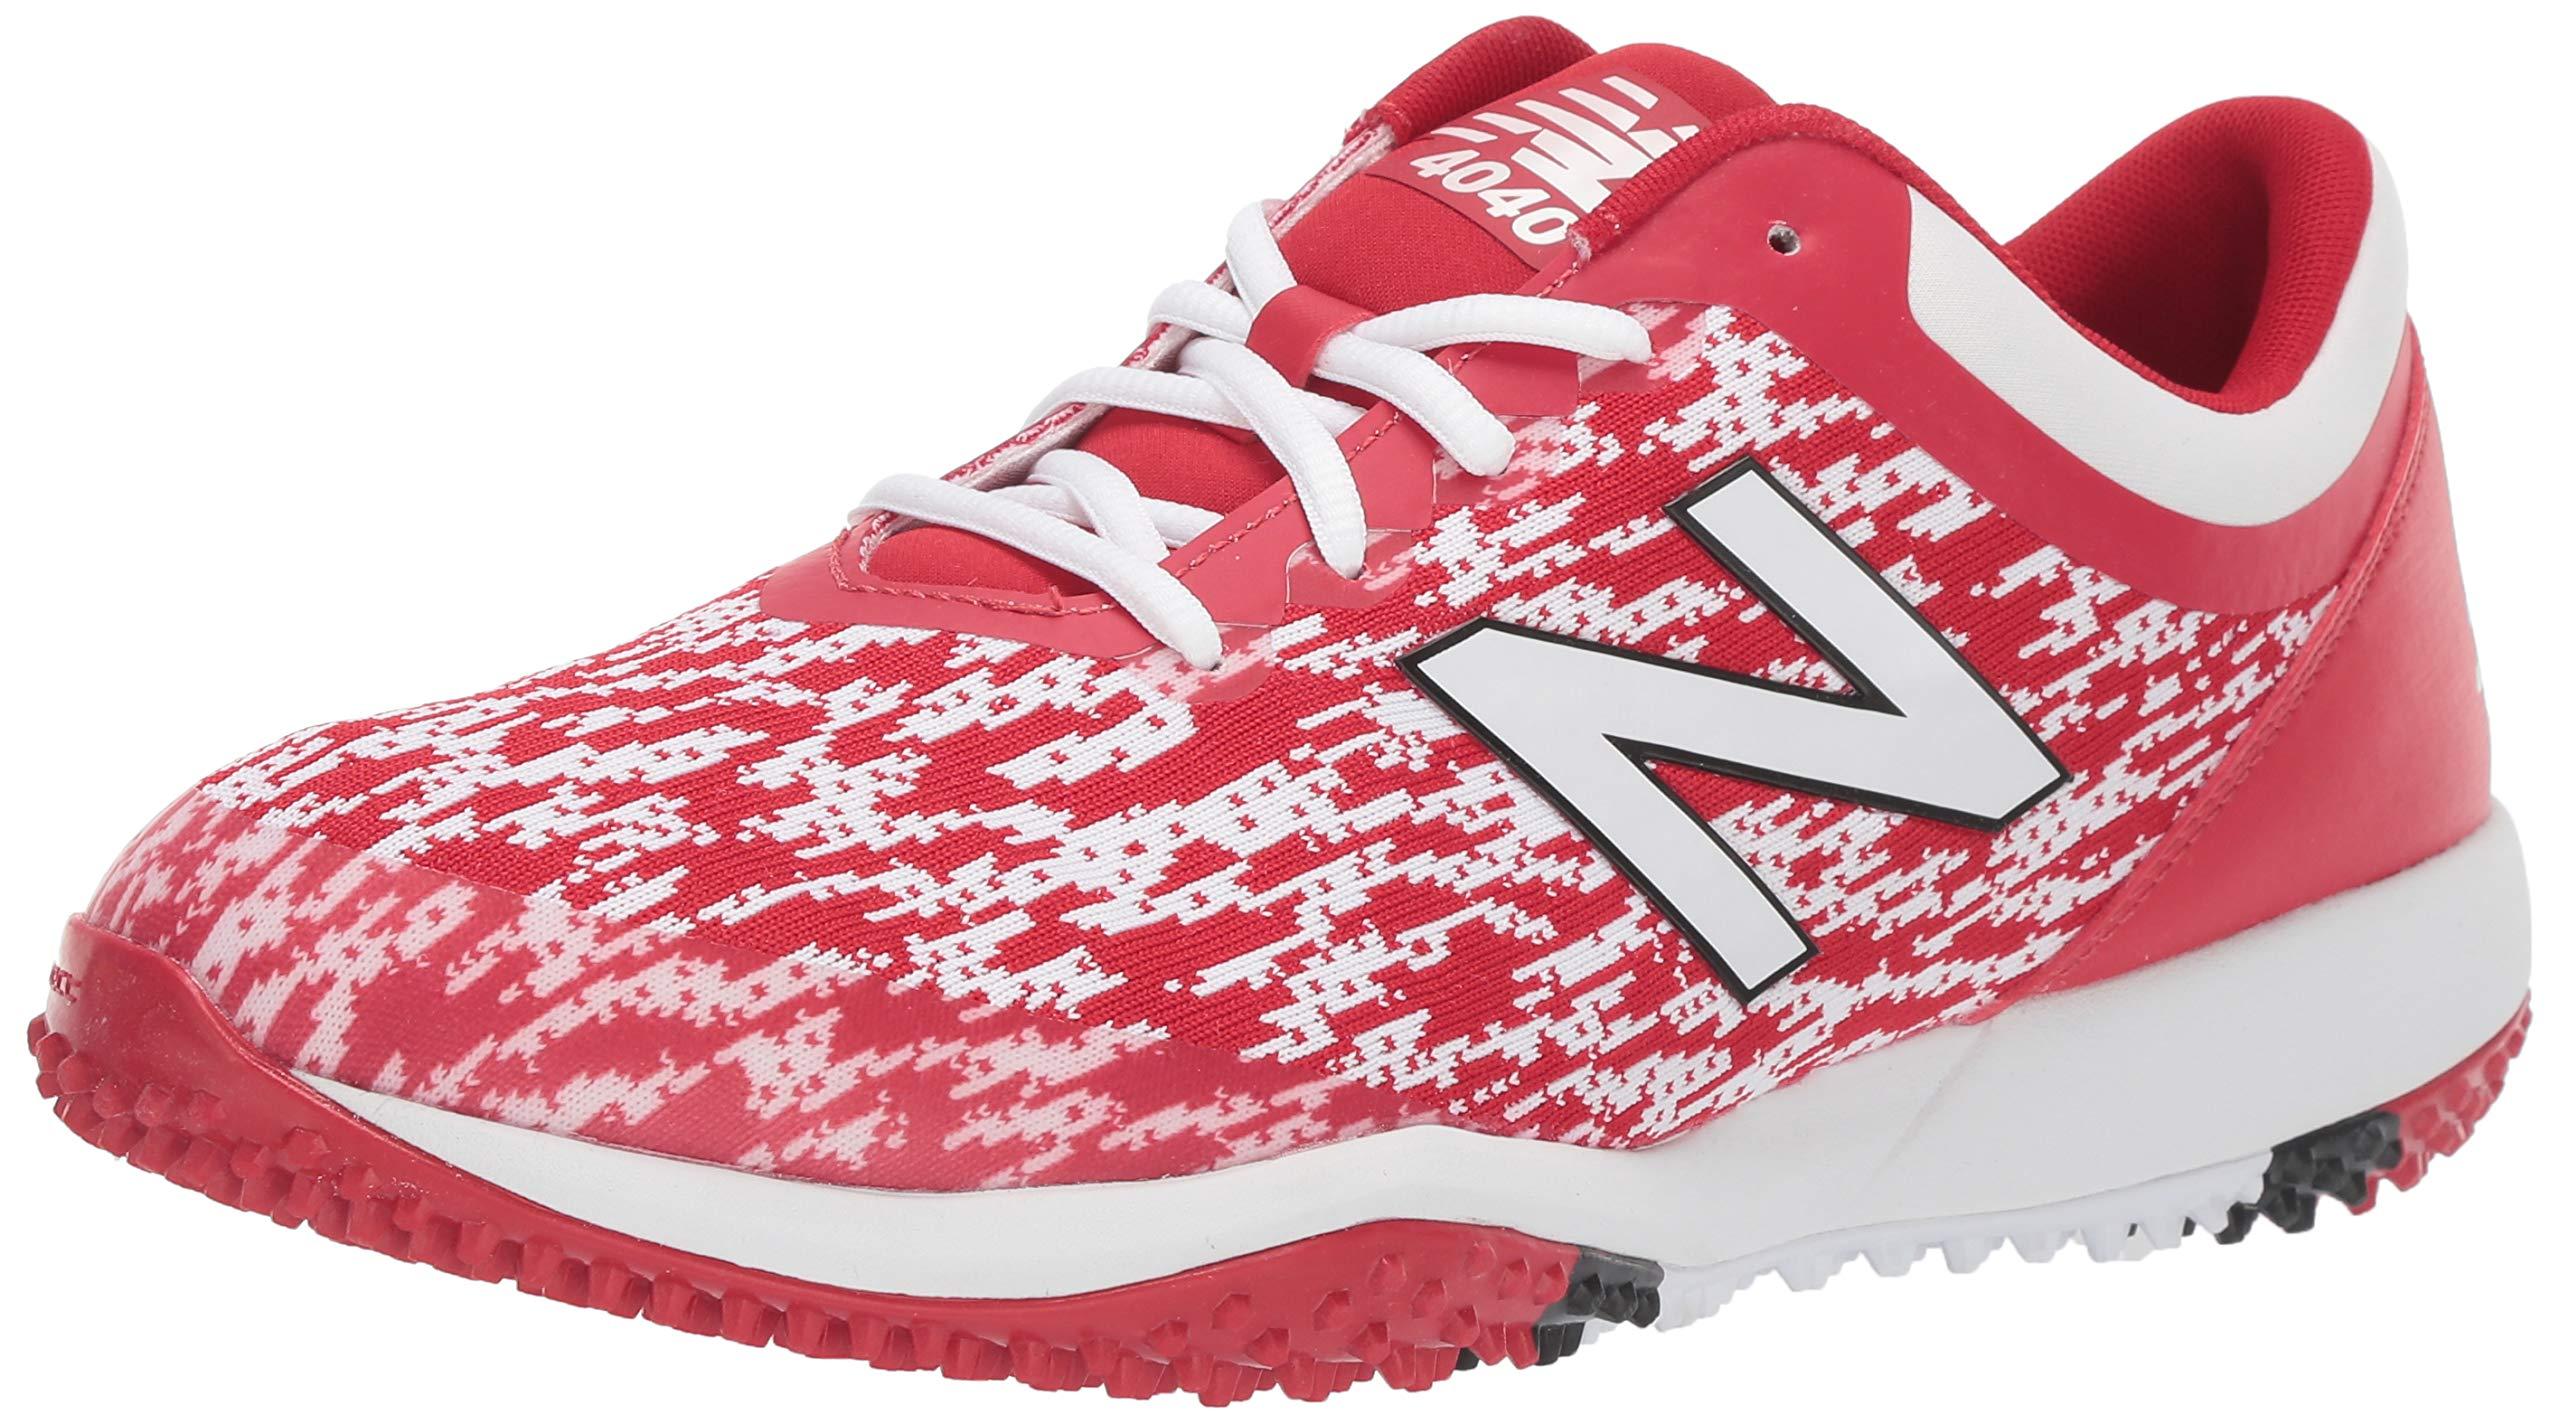 New Balance Synthetic 4040v5 Turf in Red/White (Red) for Men - Lyst